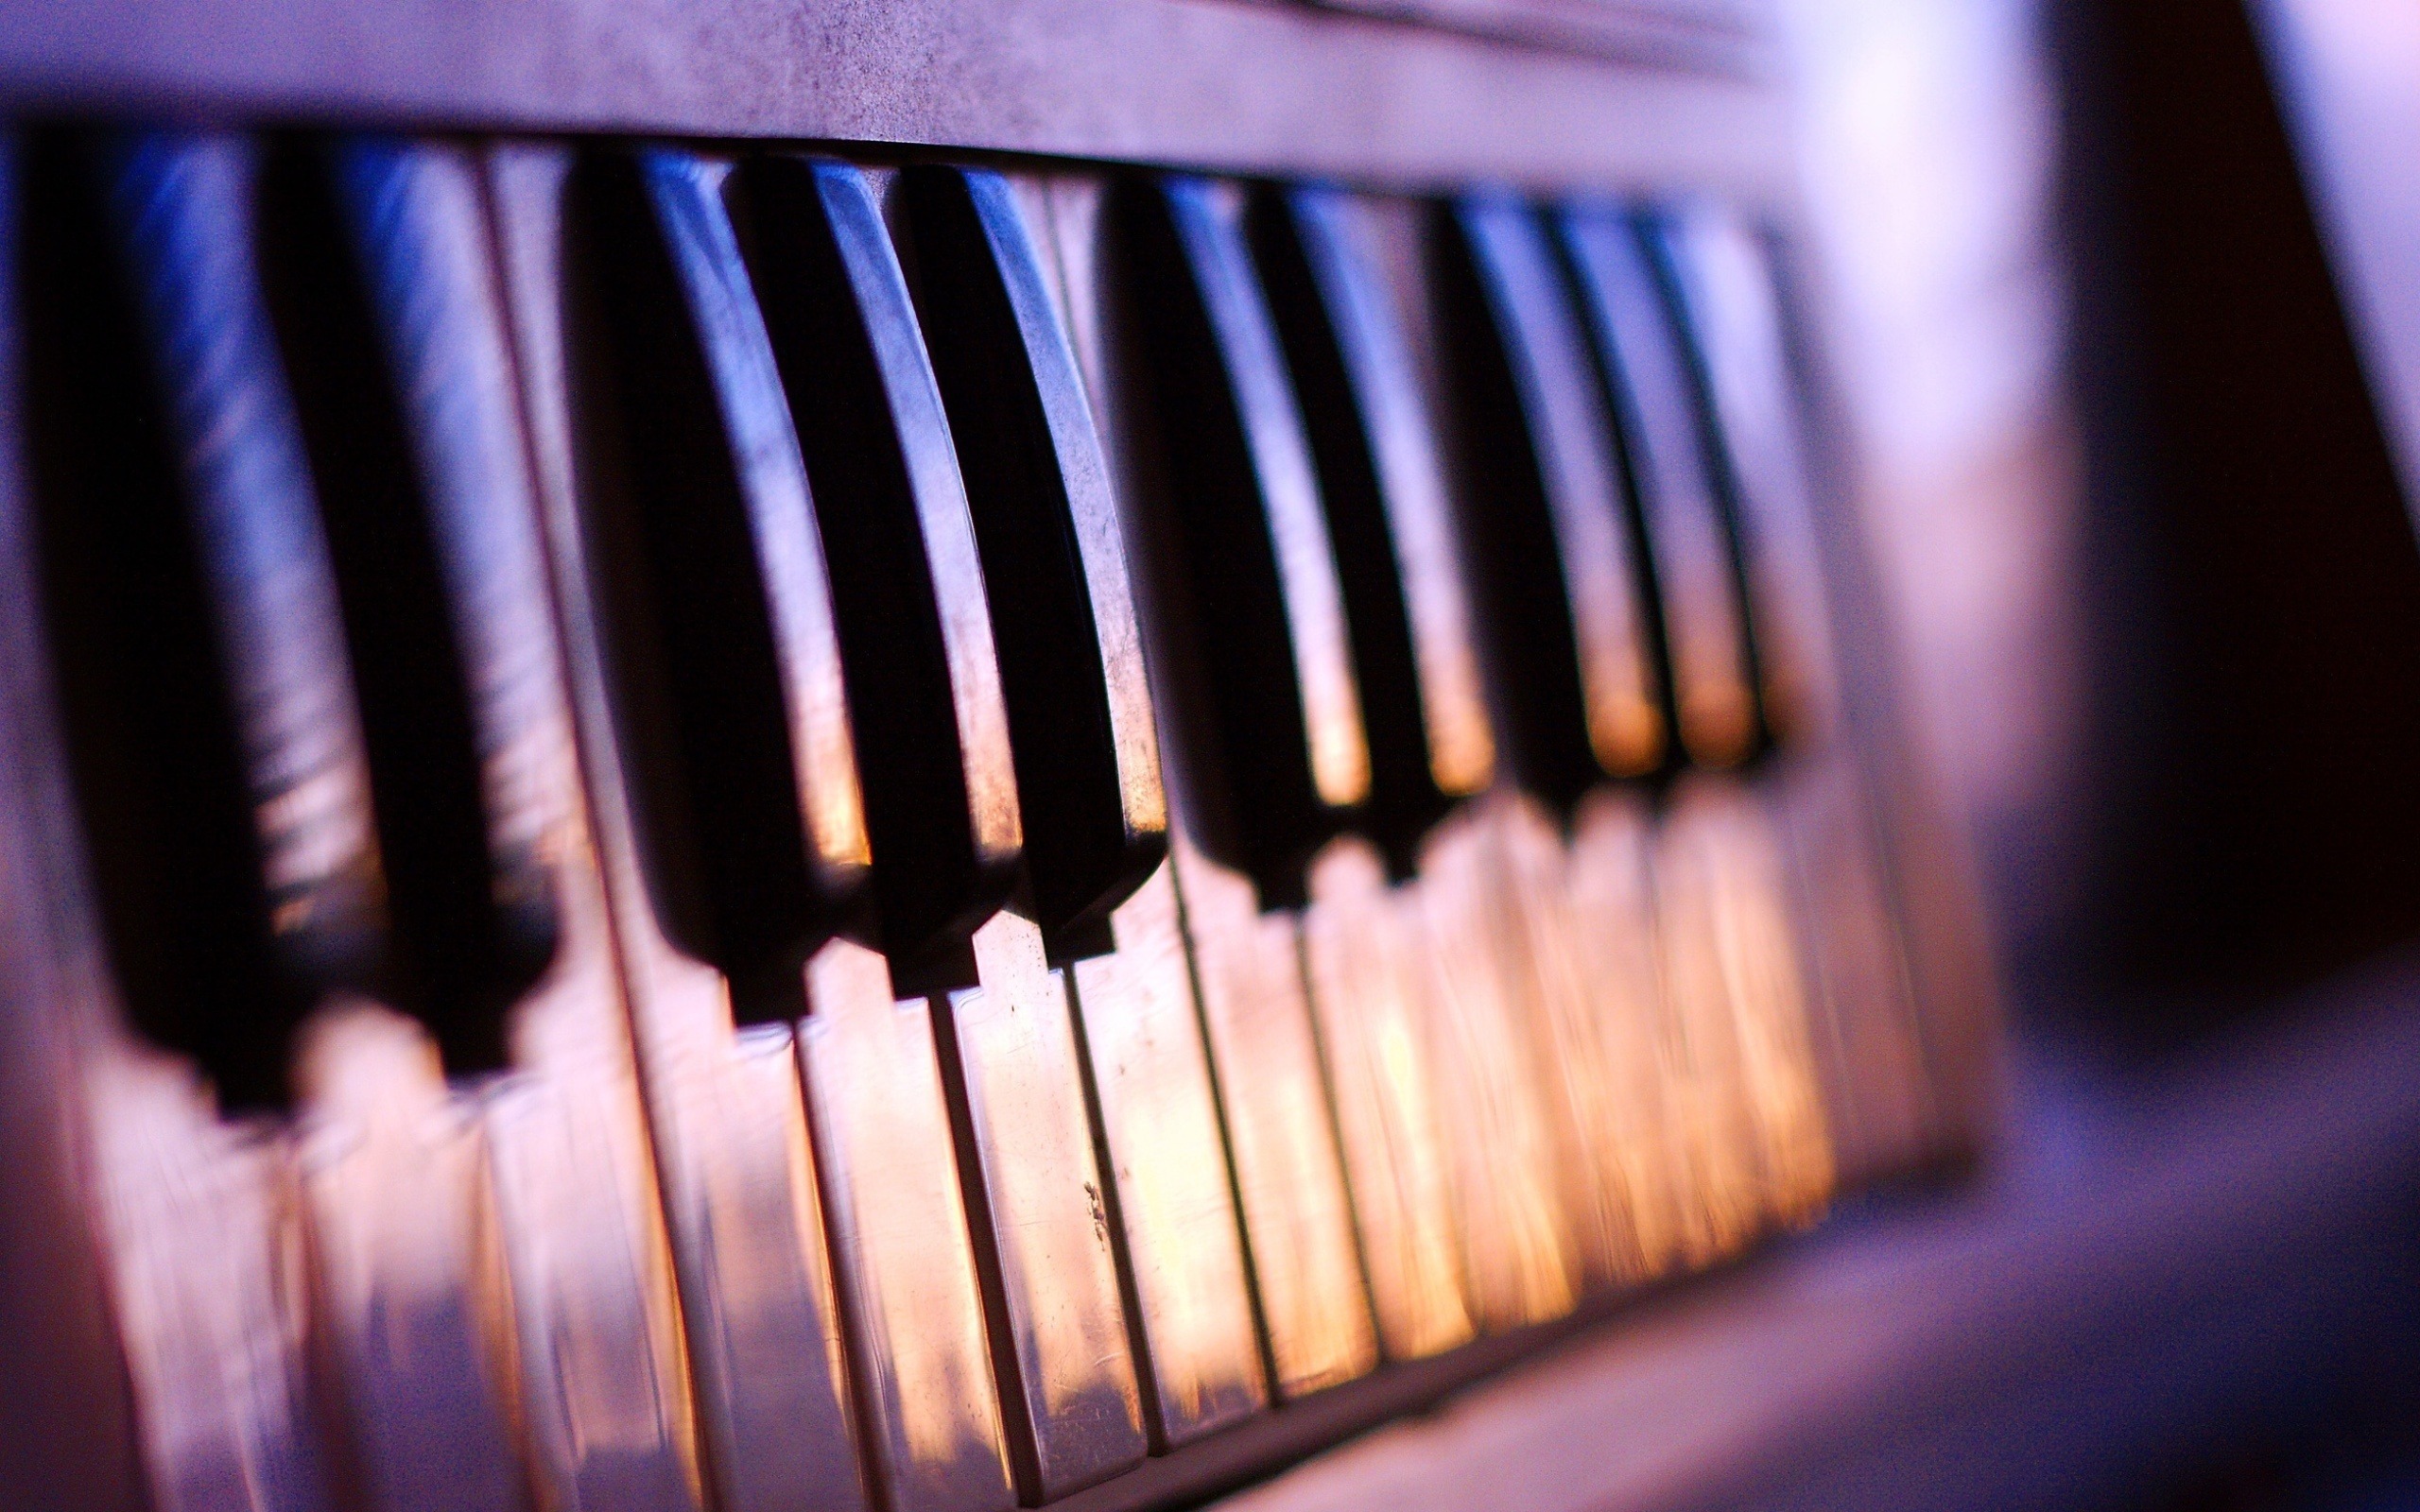 Music-themed desktop wallpaper with a piano.